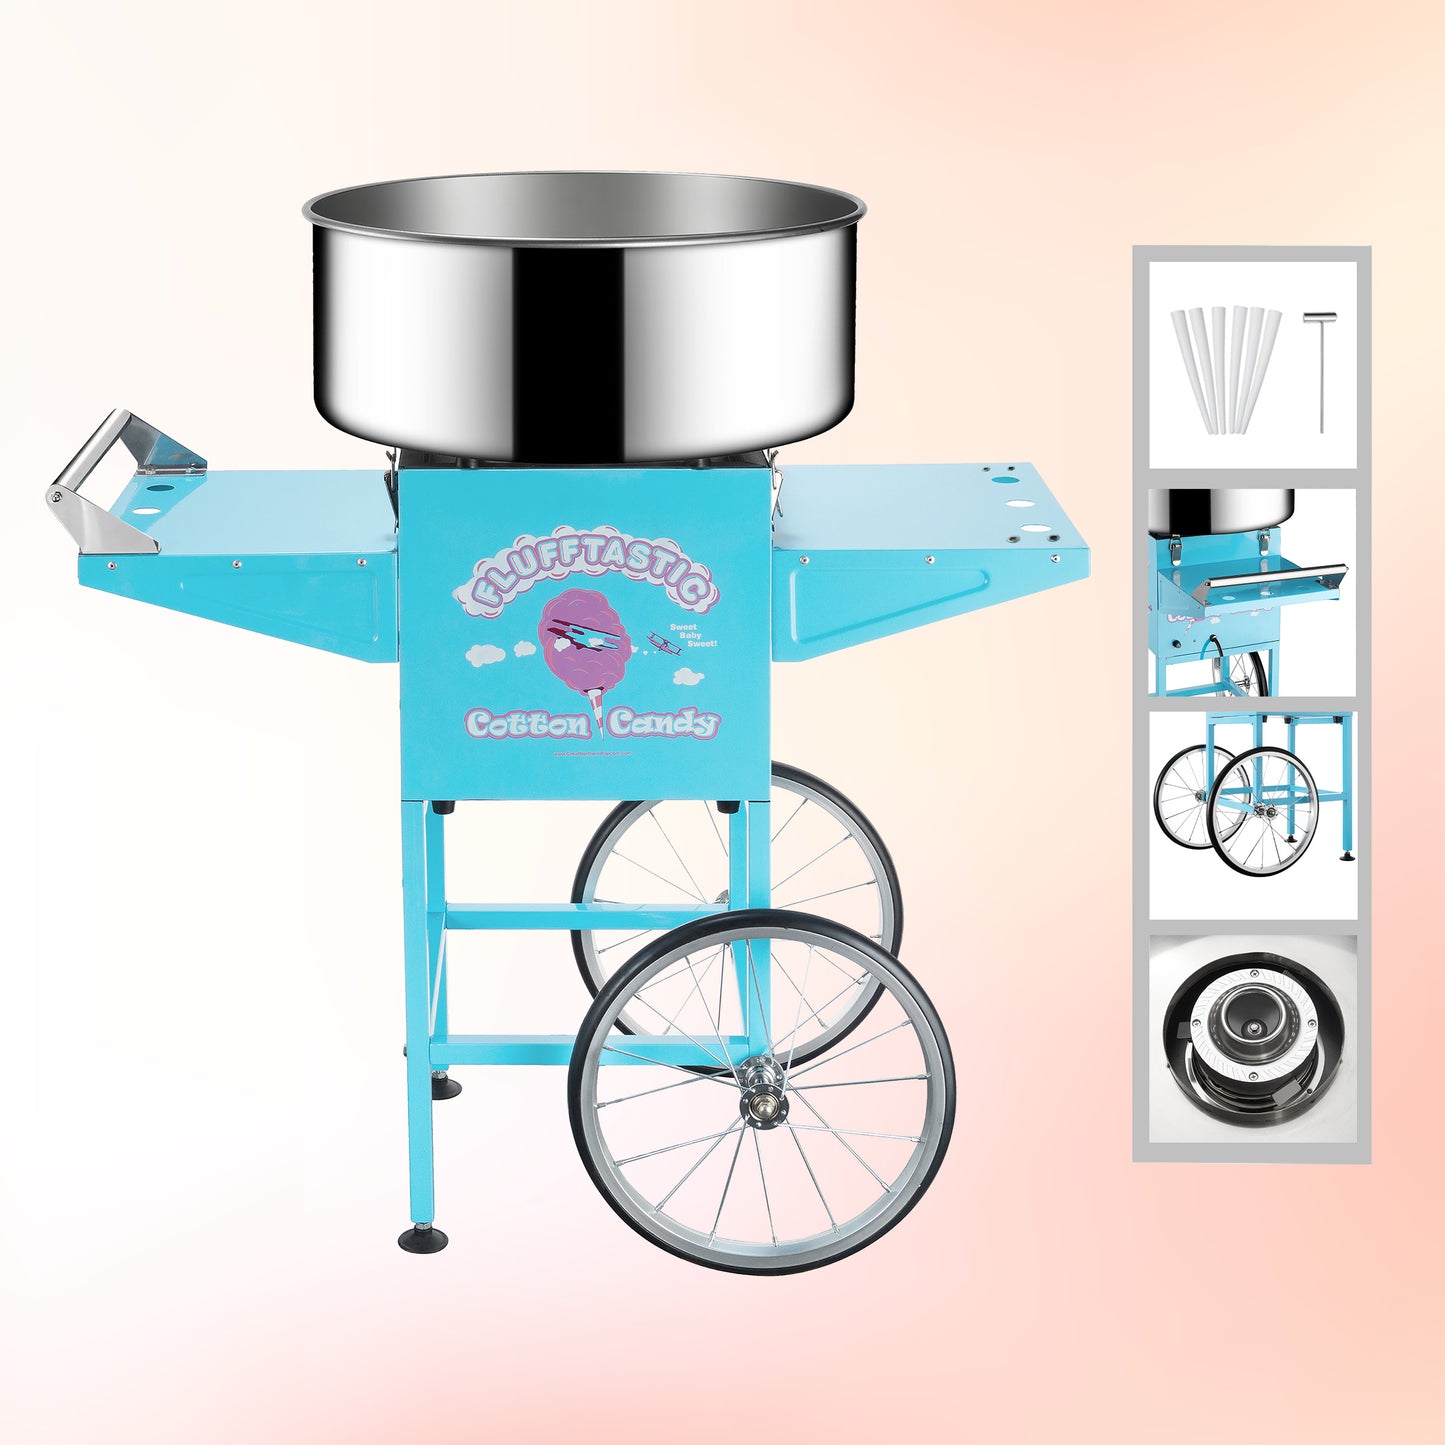 Flufftastic Cotton Candy Machine with Cart - Blue